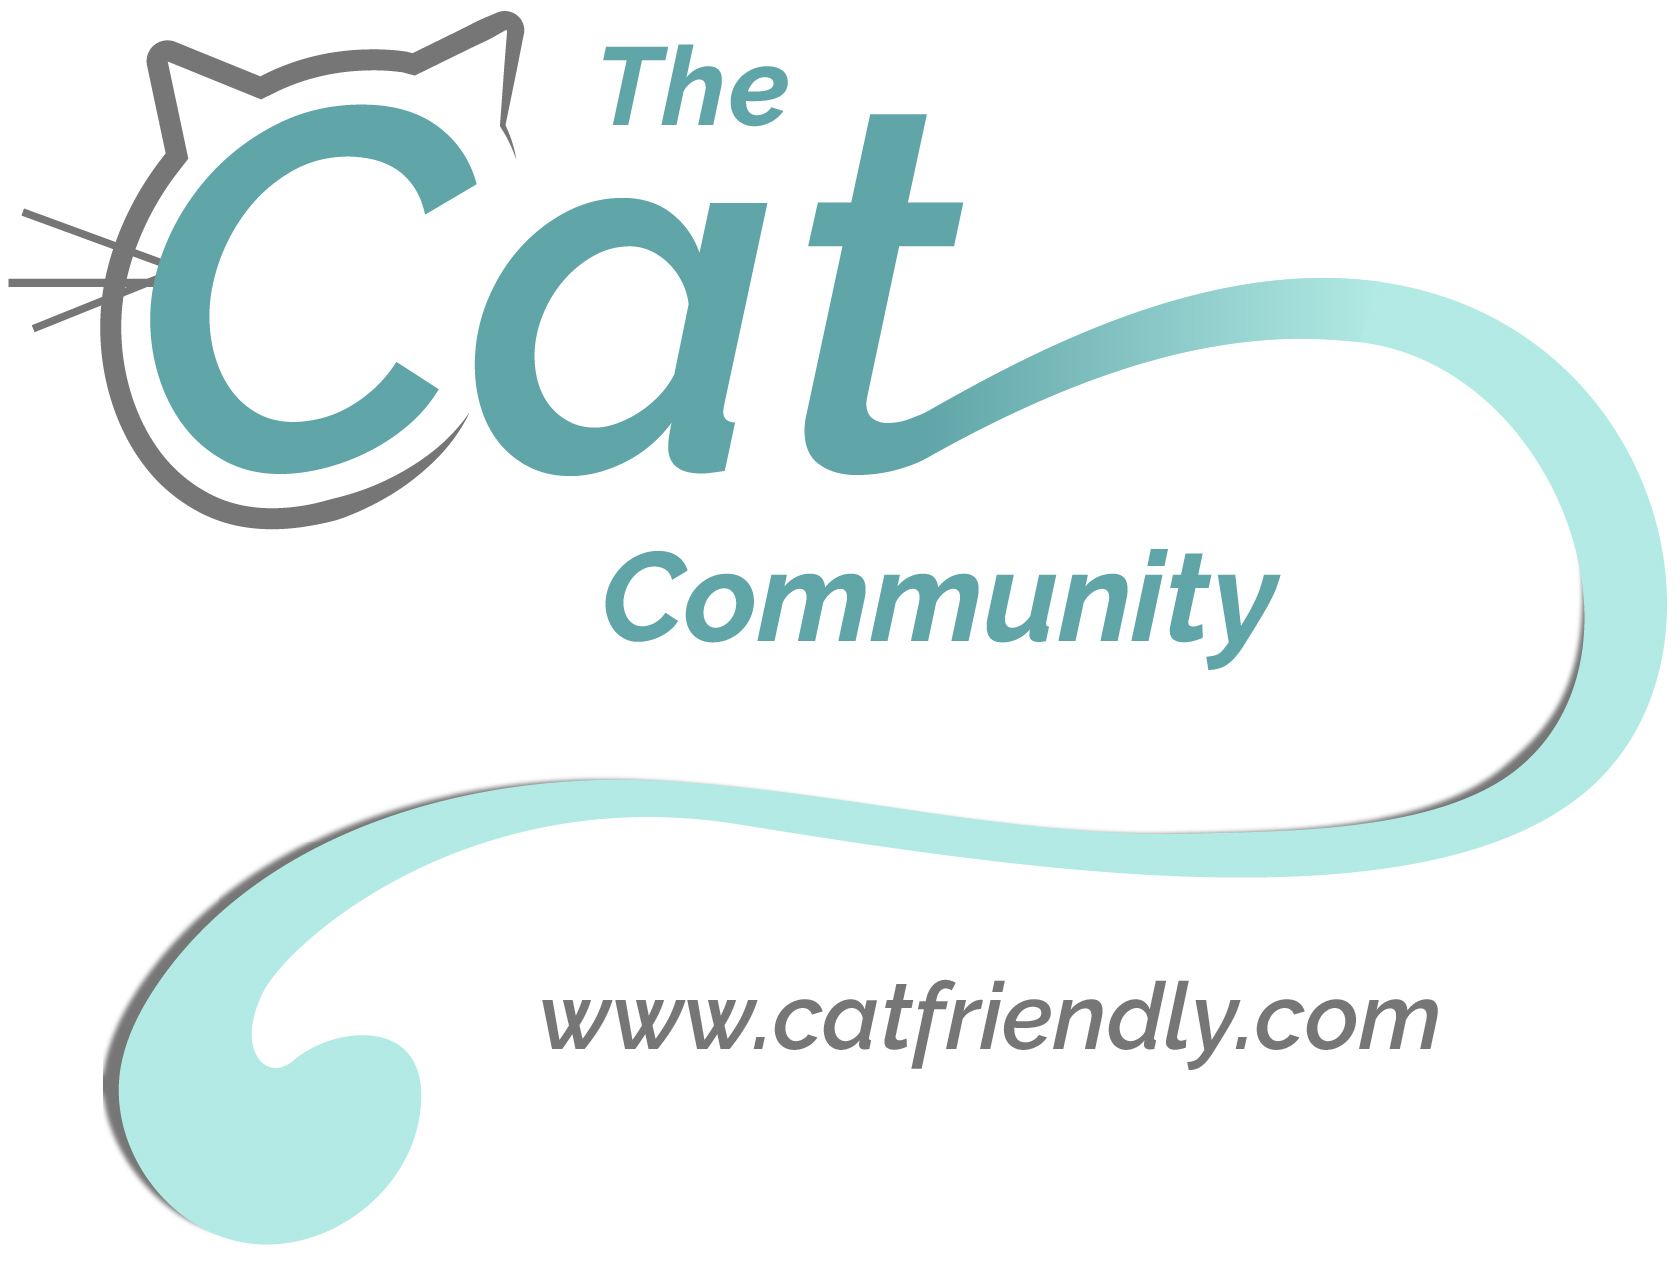 Join the Cat Community: catfriendly.com